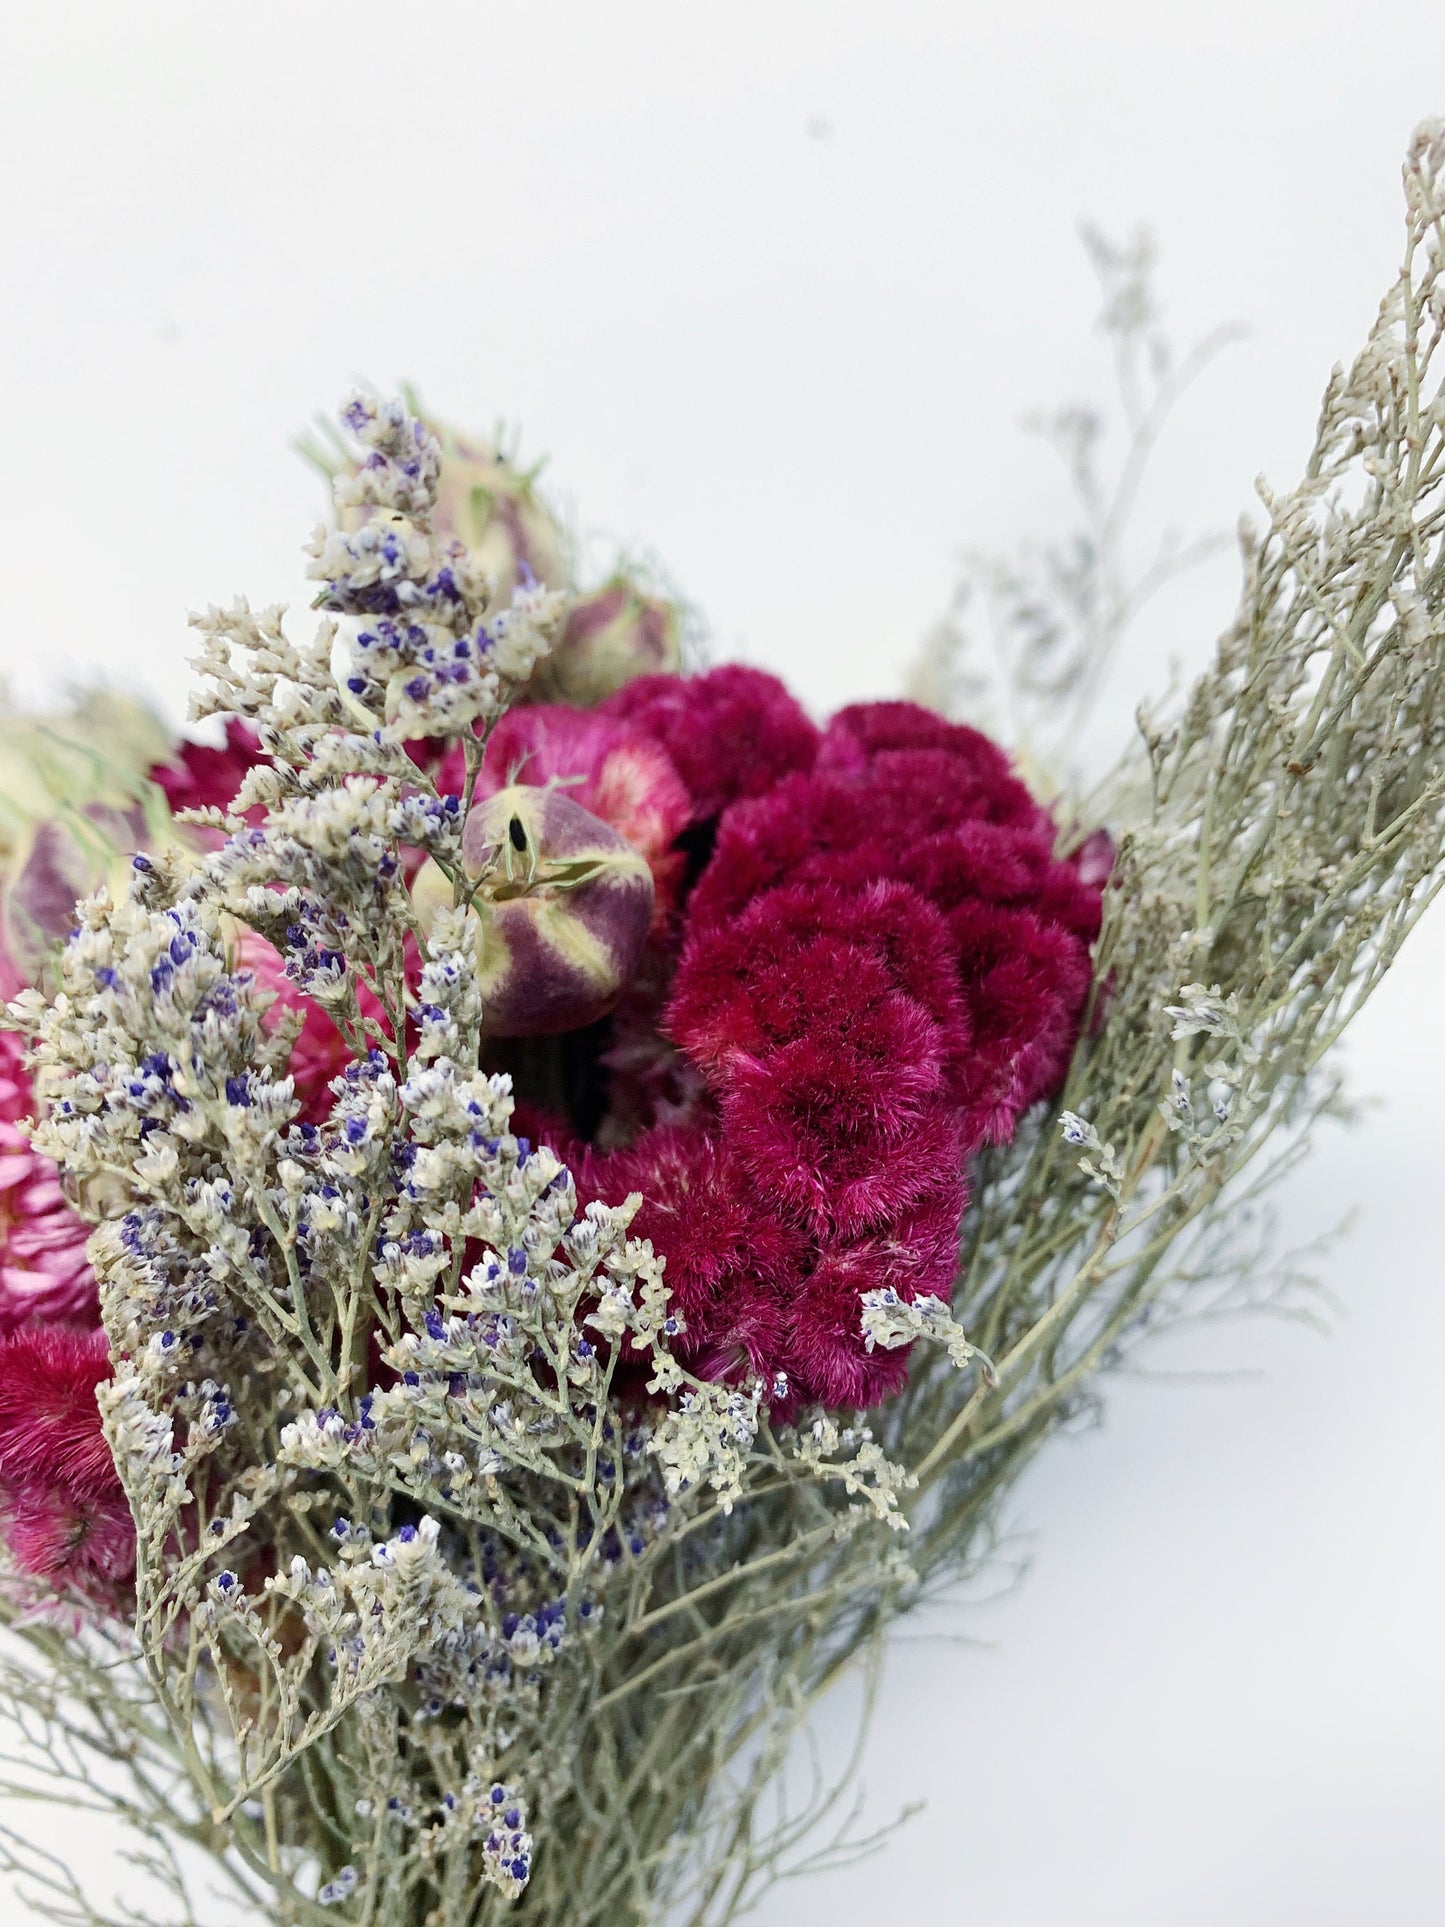 Wedding Bouquet, Spring Collection, Dried Flowers, Bridal, Strawflowers, Nigella, Caspia, Preserved Floral, Coxcomb